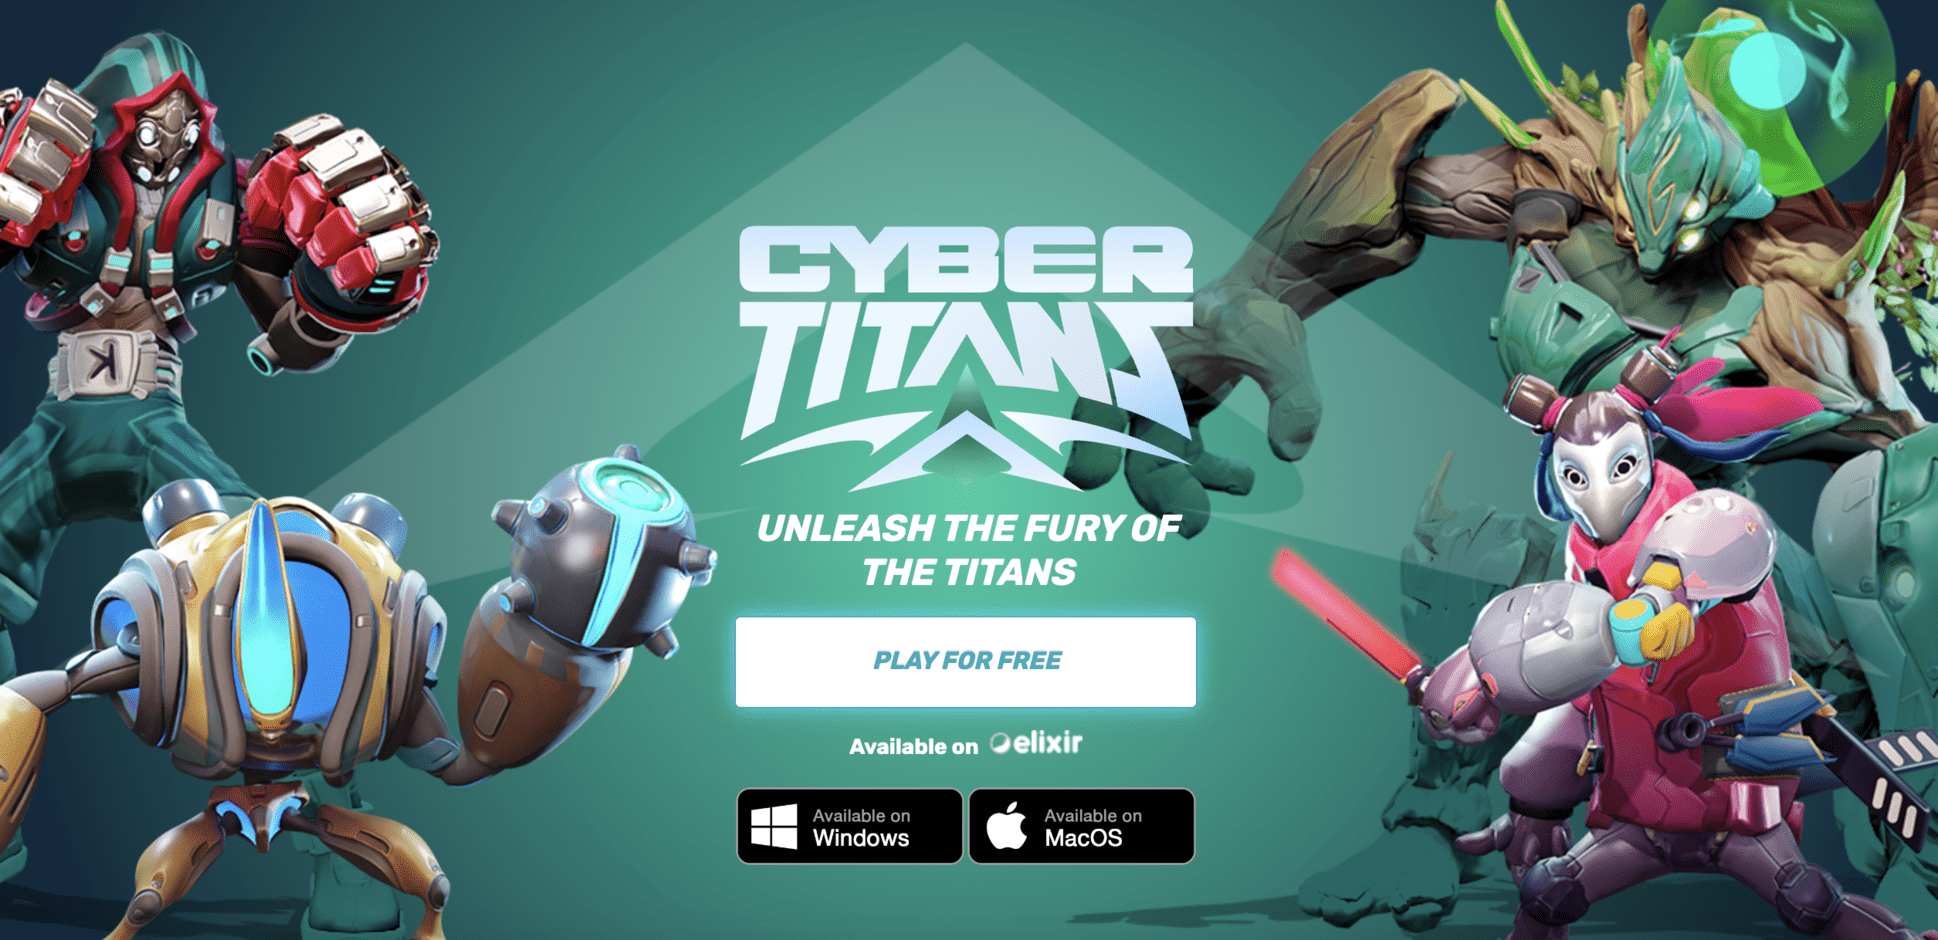 CyberTitans  Download and Play for Free - Epic Games Store